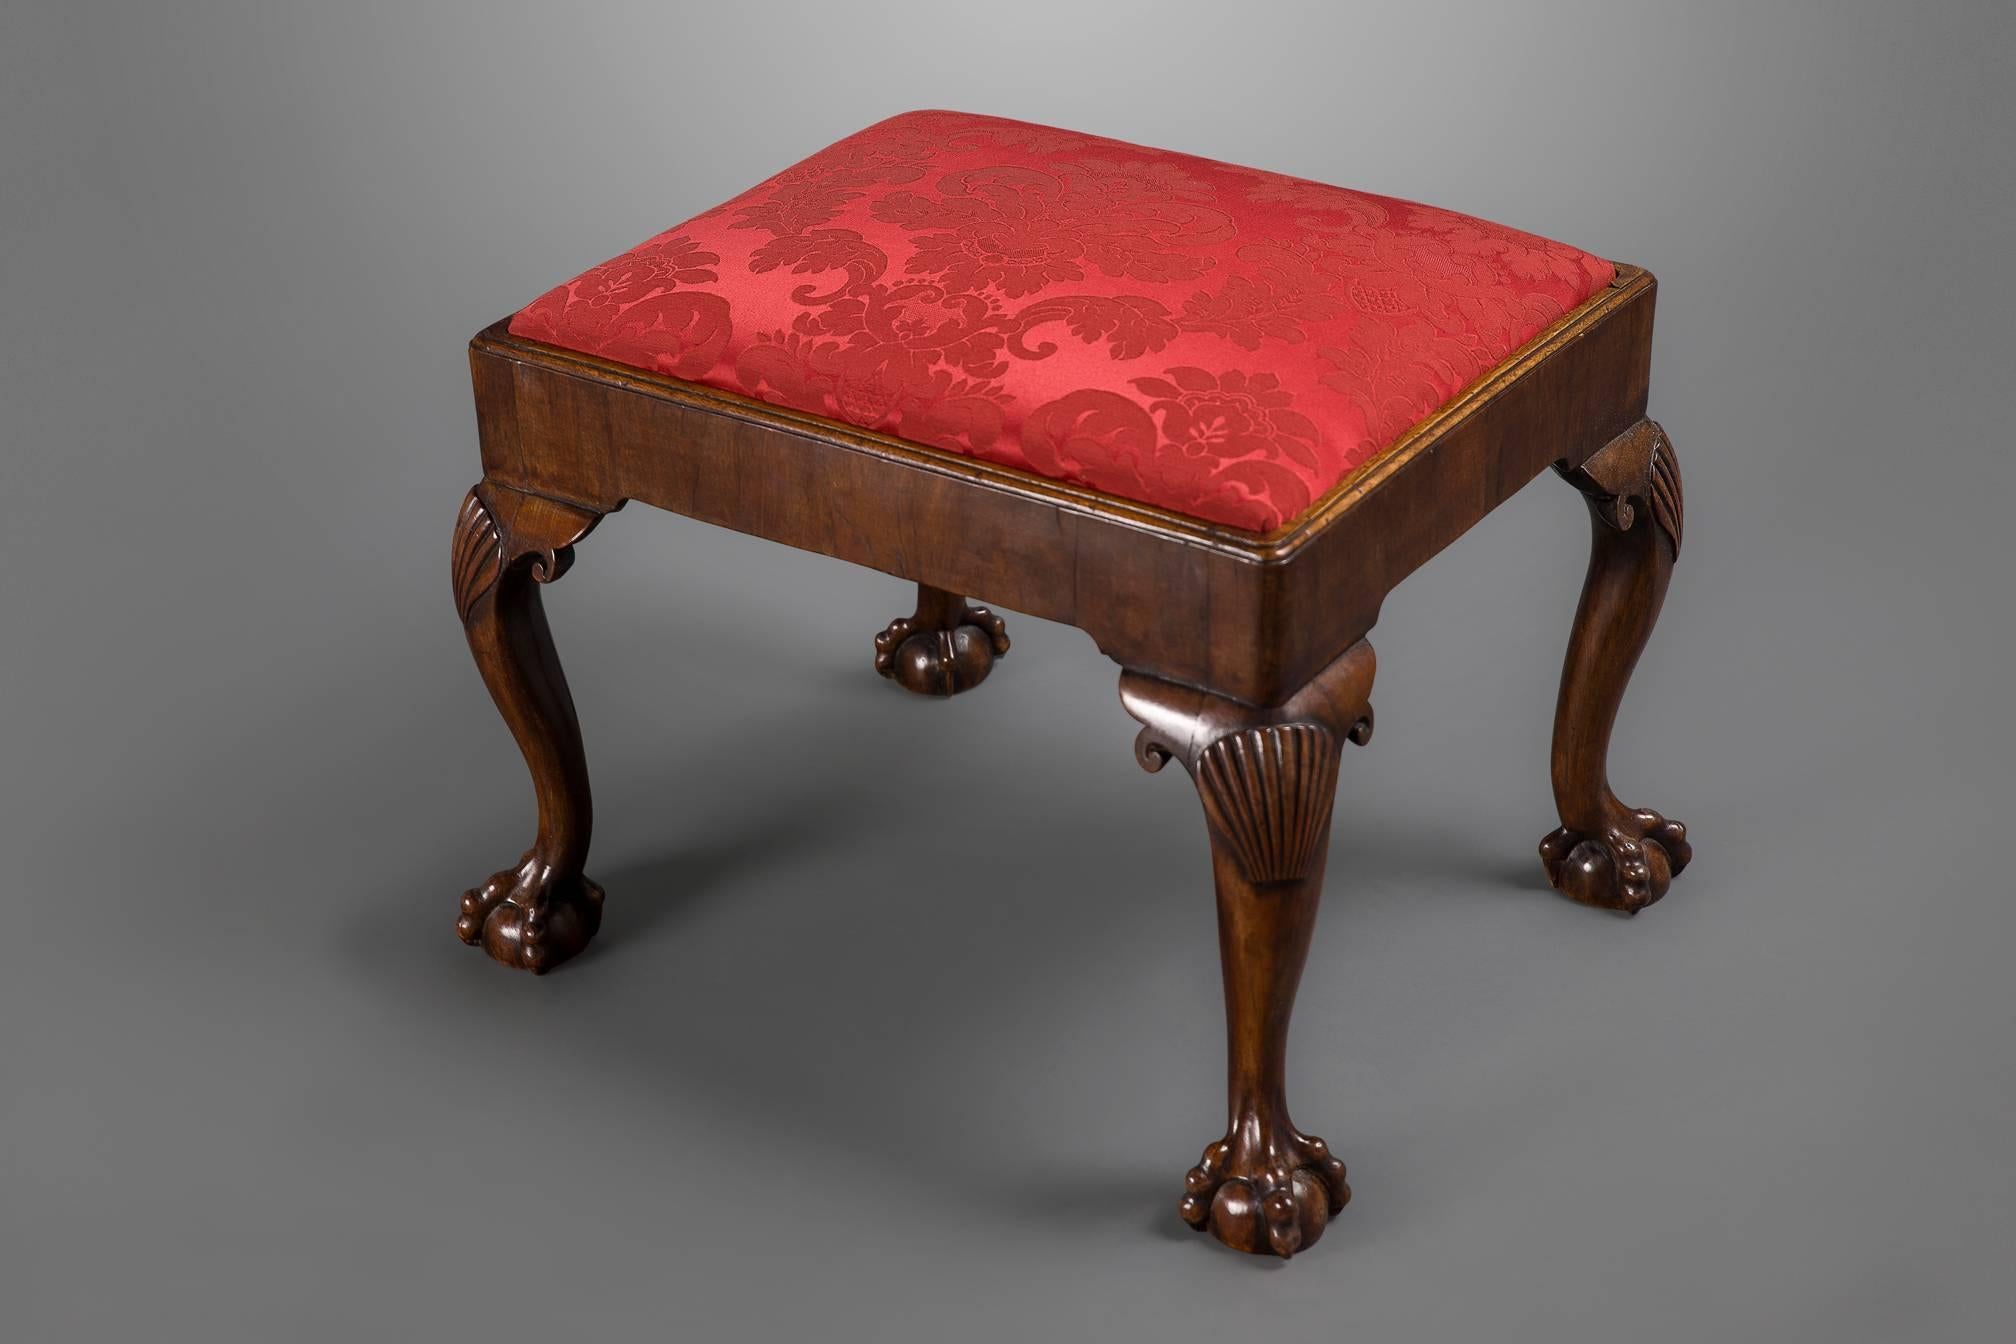 A rather good rectangular stool is walnut with shell curved knees and ball and claw feet, cornered in a deep red scalamandre silk and retaining the original drop in seat.

Provenance: Estate of Carroll Petrie New York.

English, circa 1740.